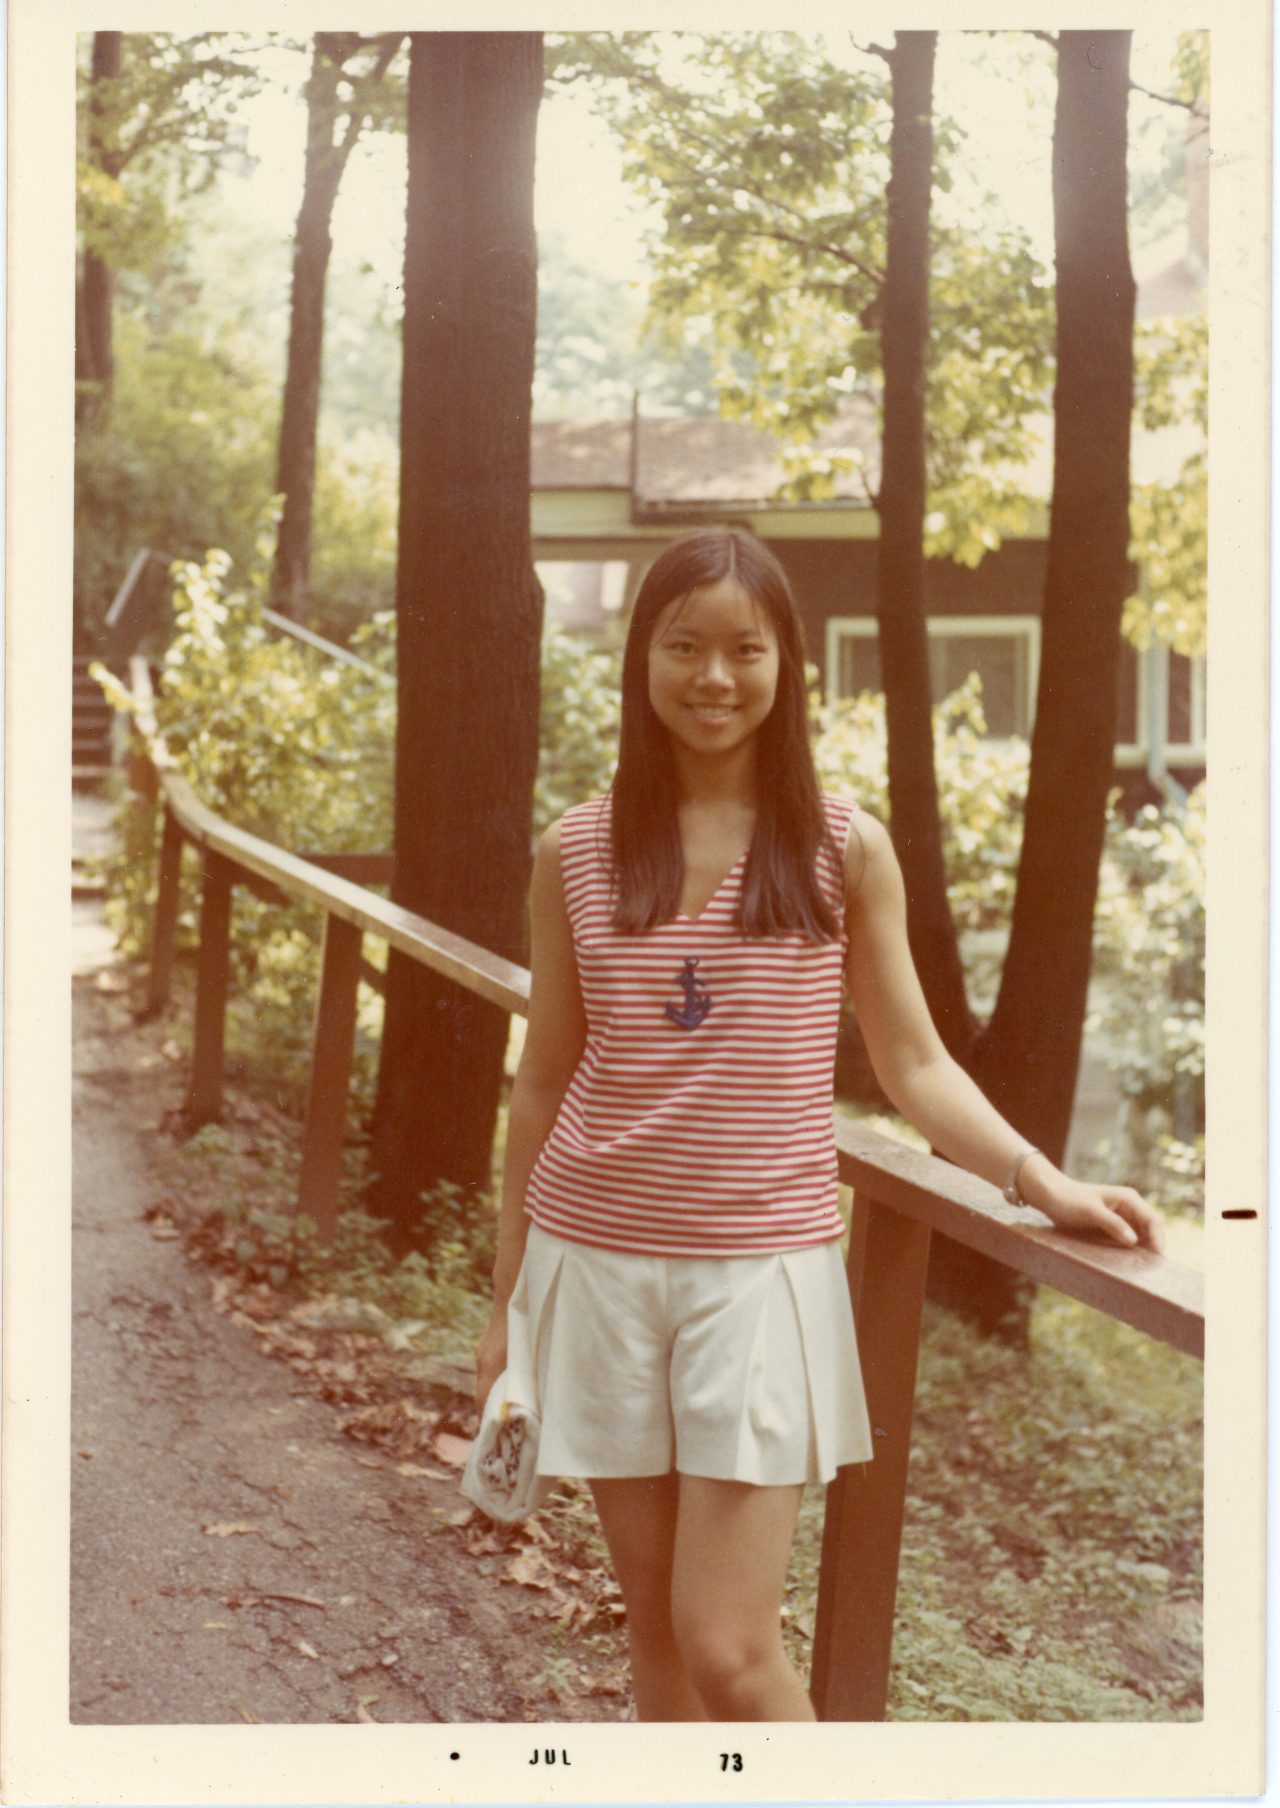 Elaine Chao at age 19, when she got her citizenship.